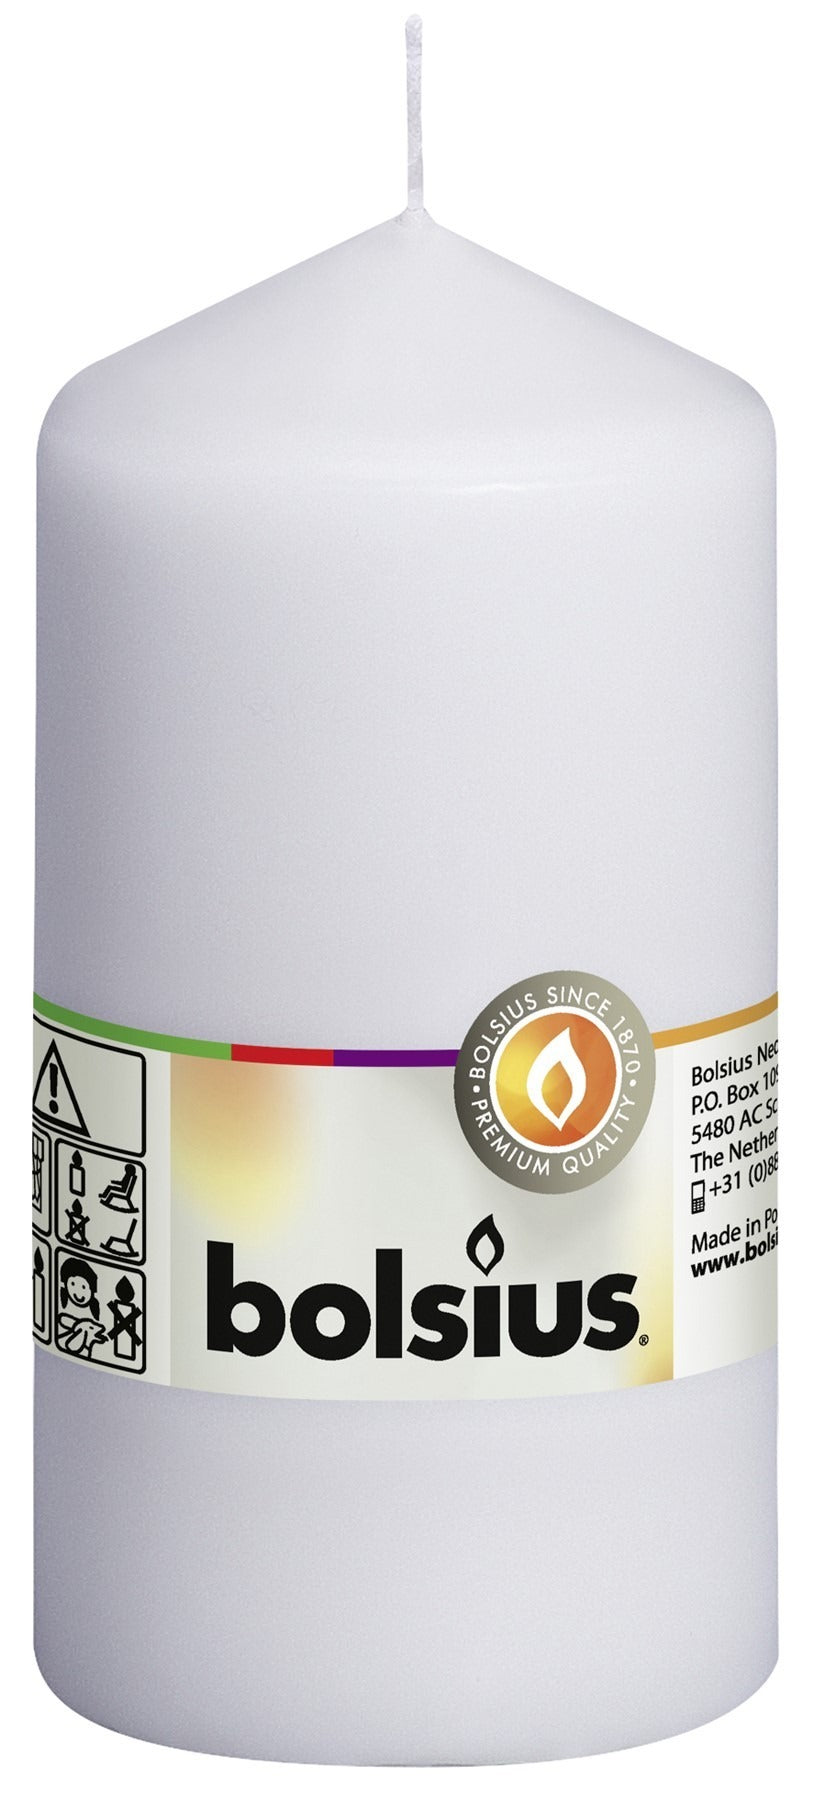 View Bolsius Pillar Candle White 130mm x 68 mm information